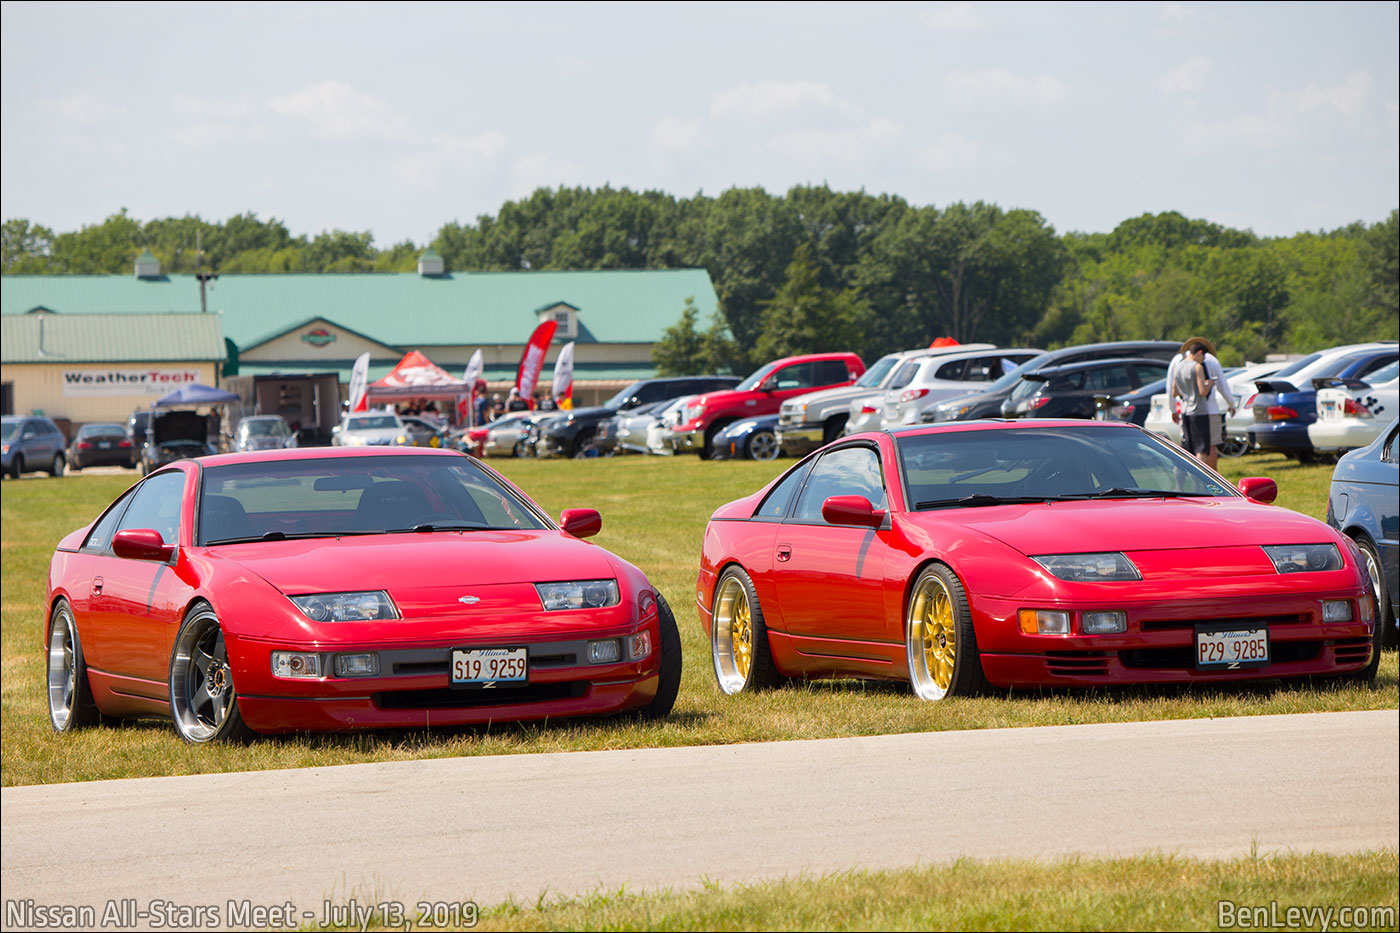 Pair of red Nissan 300ZXs